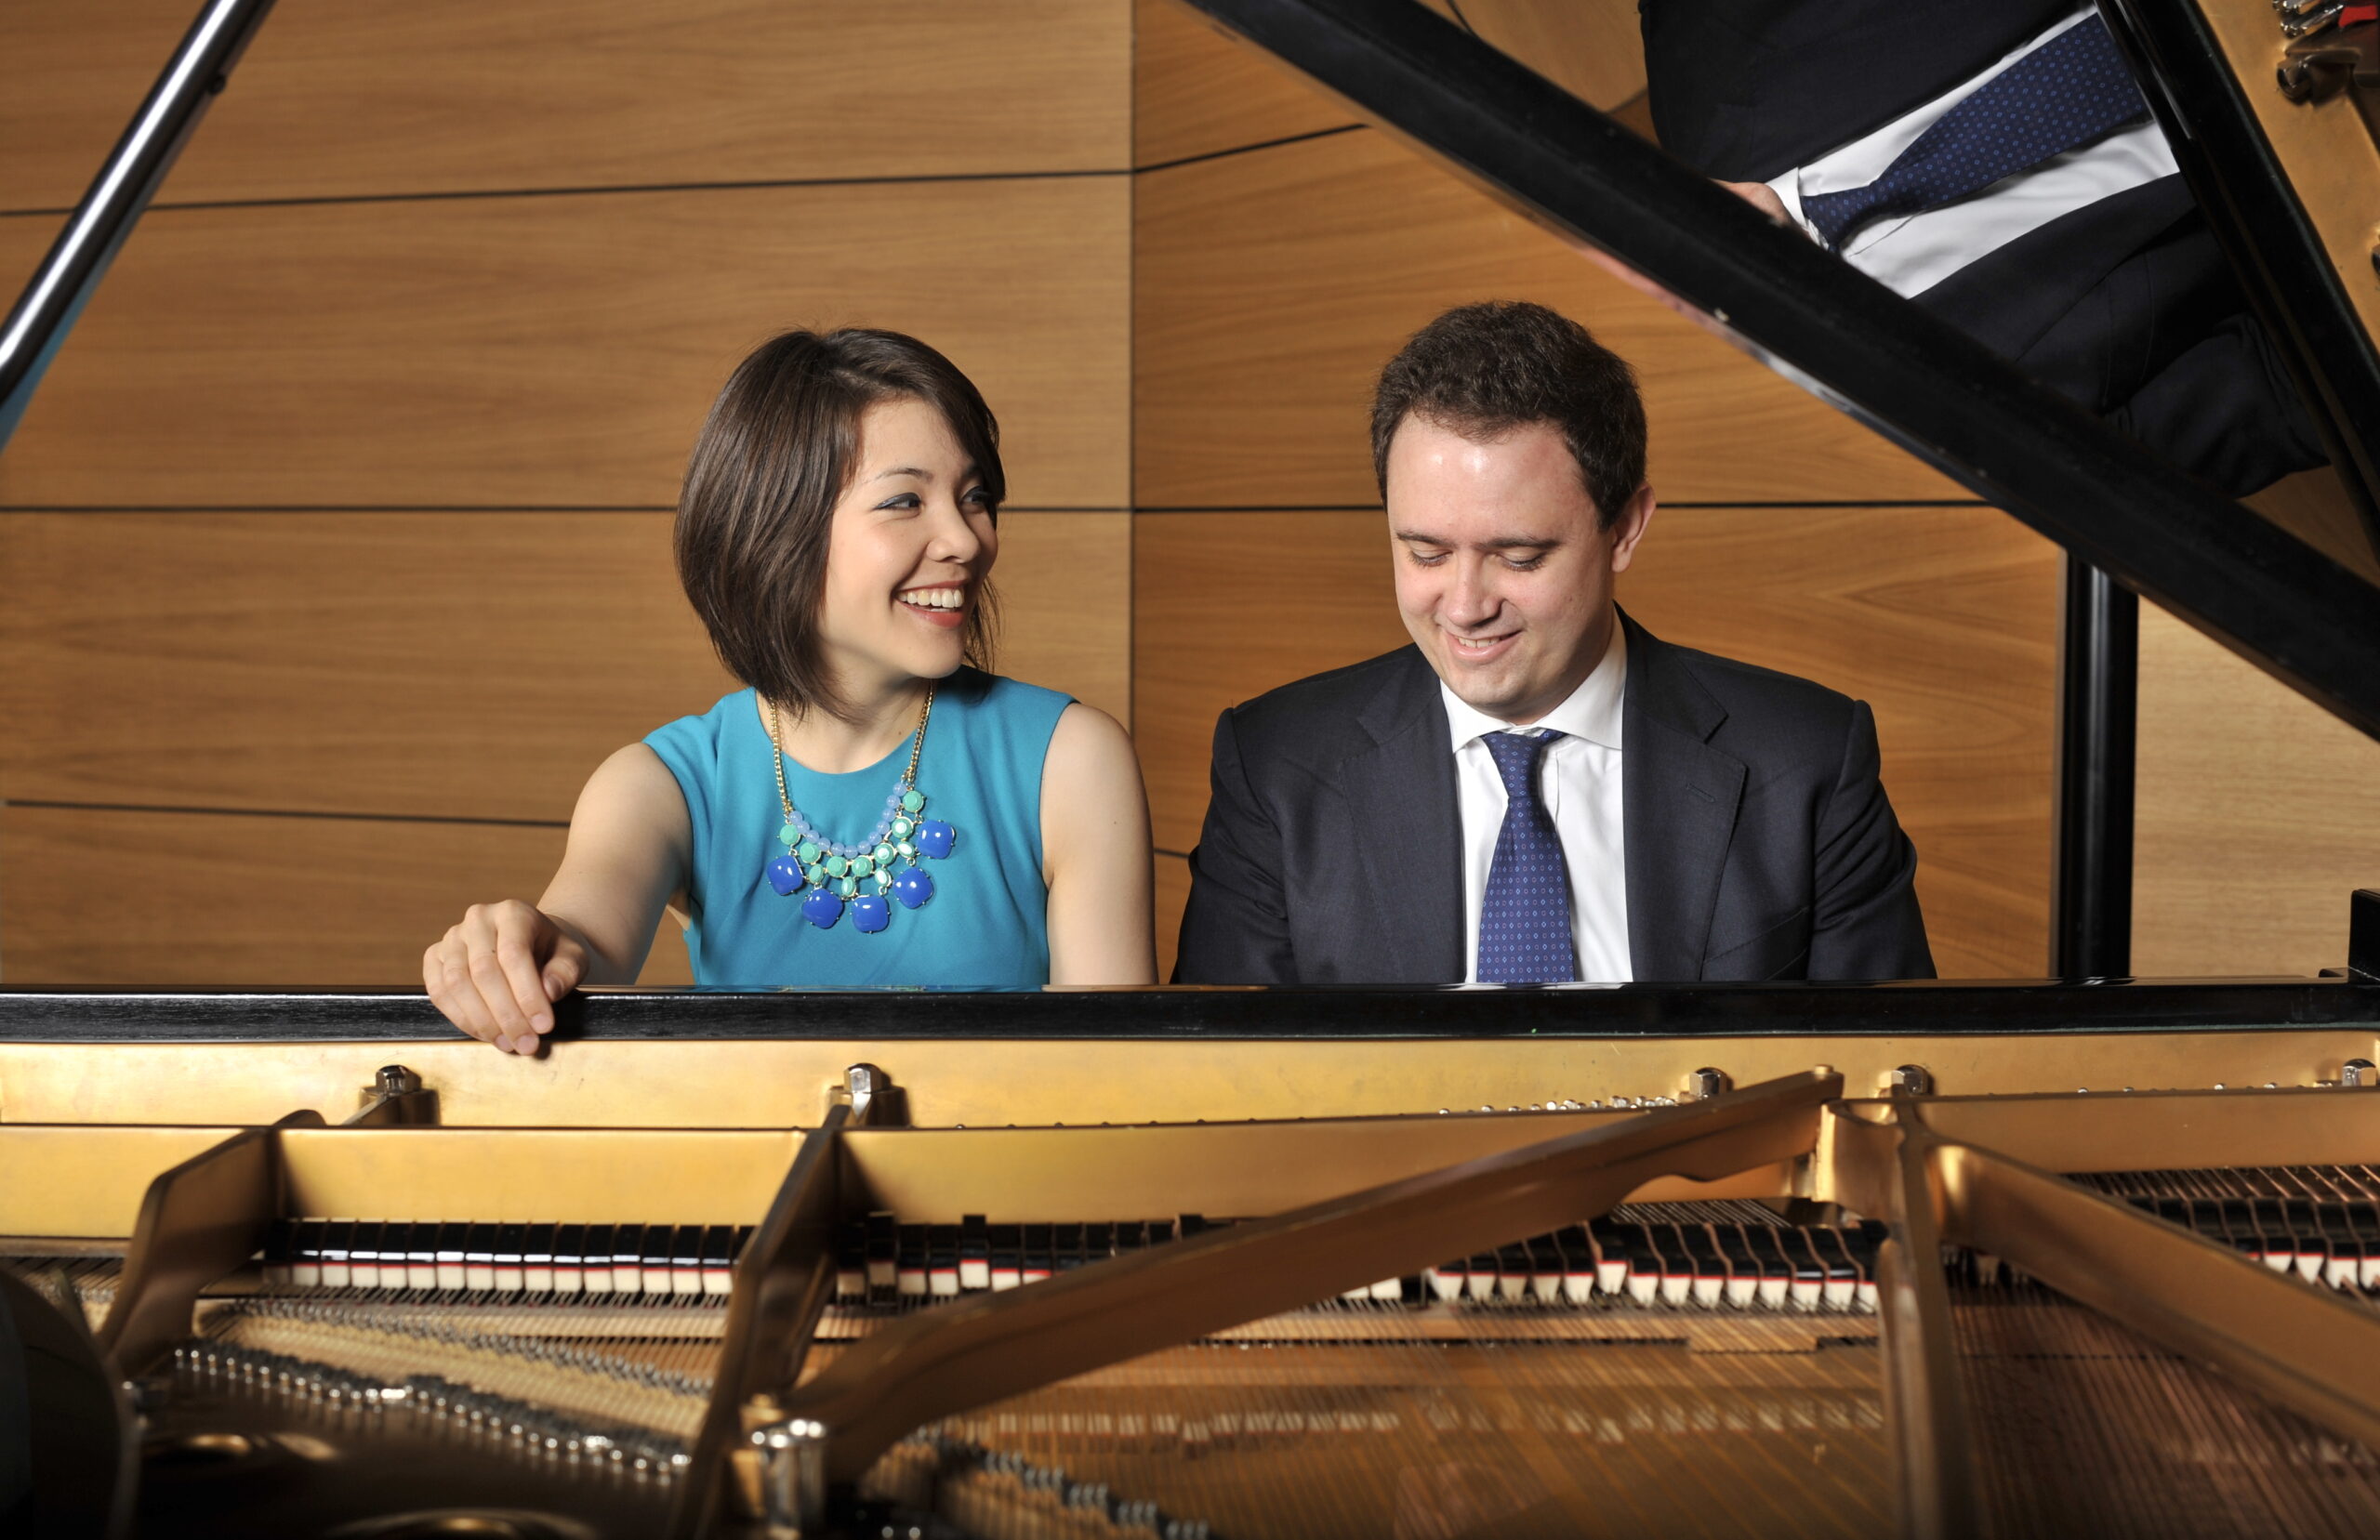 A woman and a man both sitting behind a piano